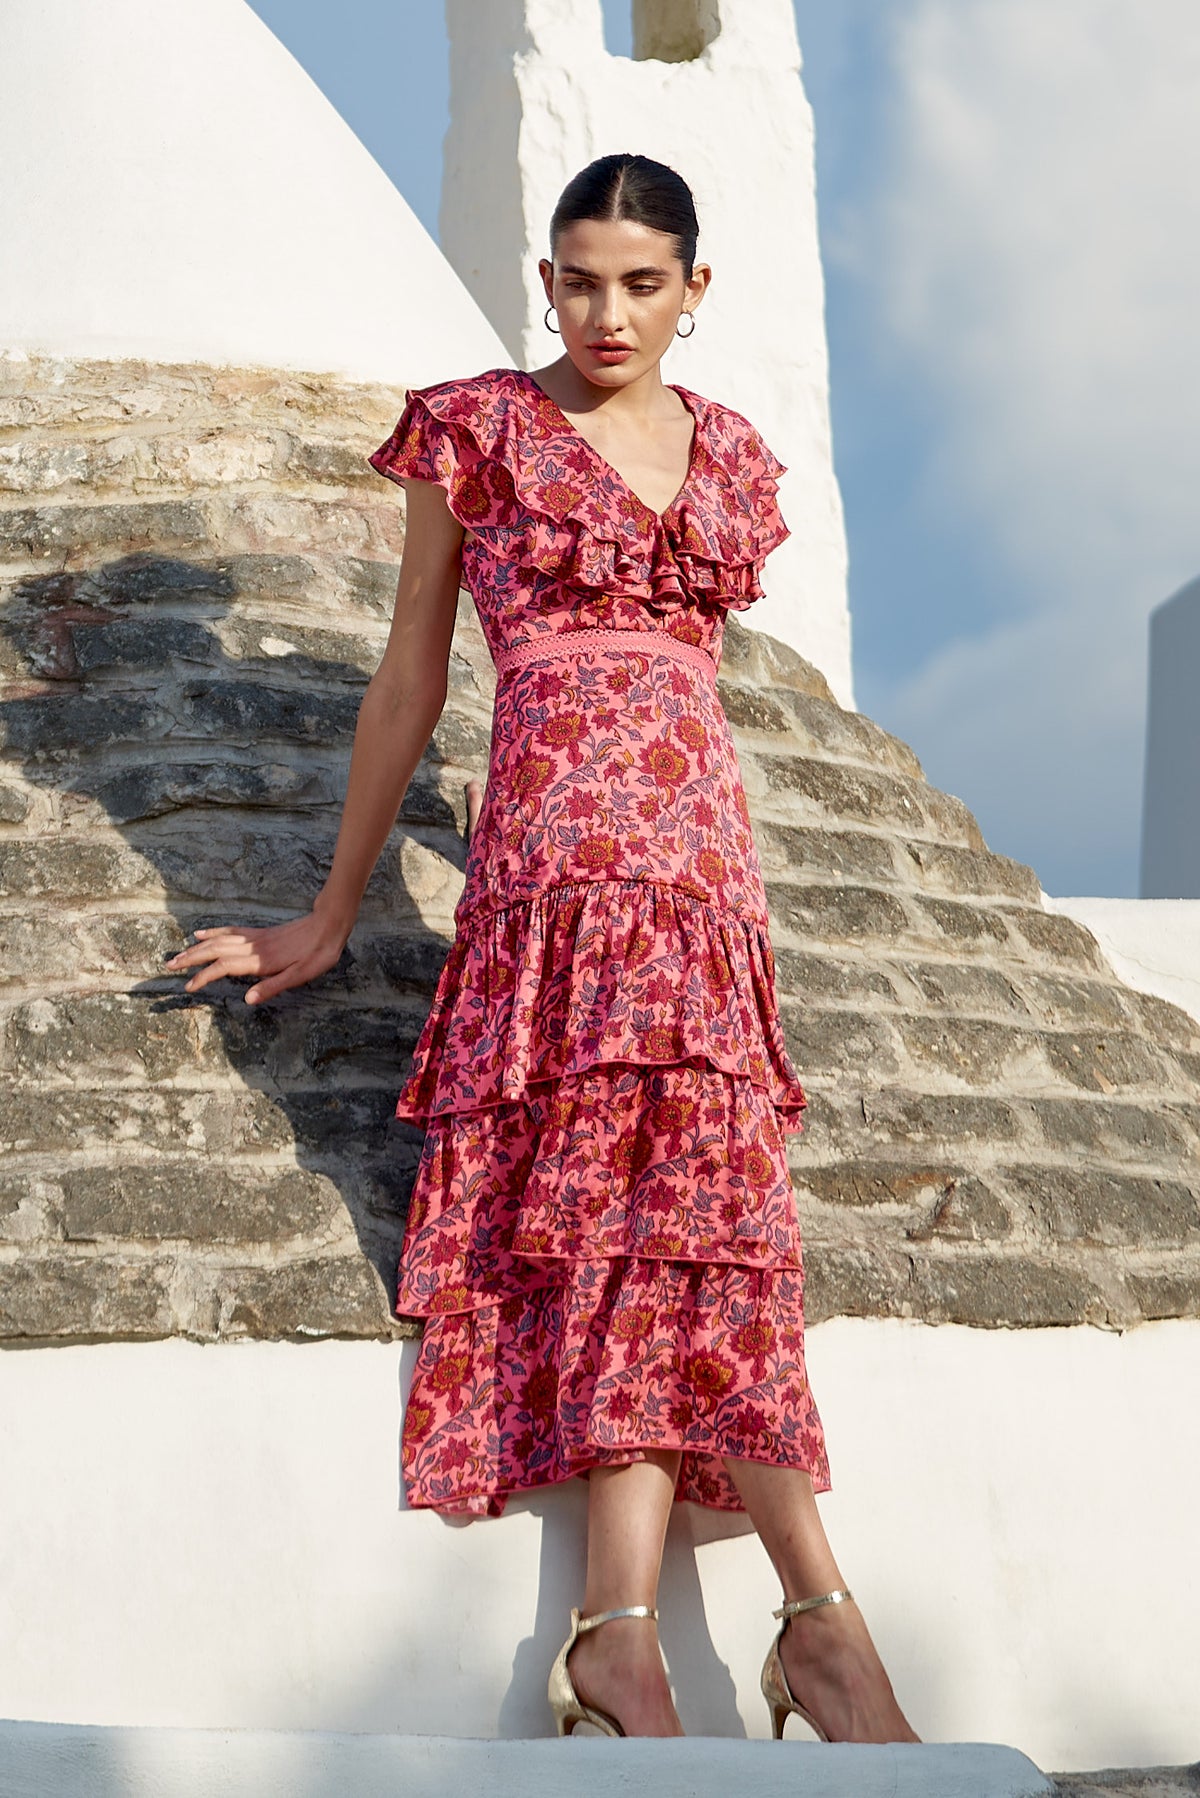 Pink ruffle midi dress with triple tiered skirt empire line and overall floral pattern